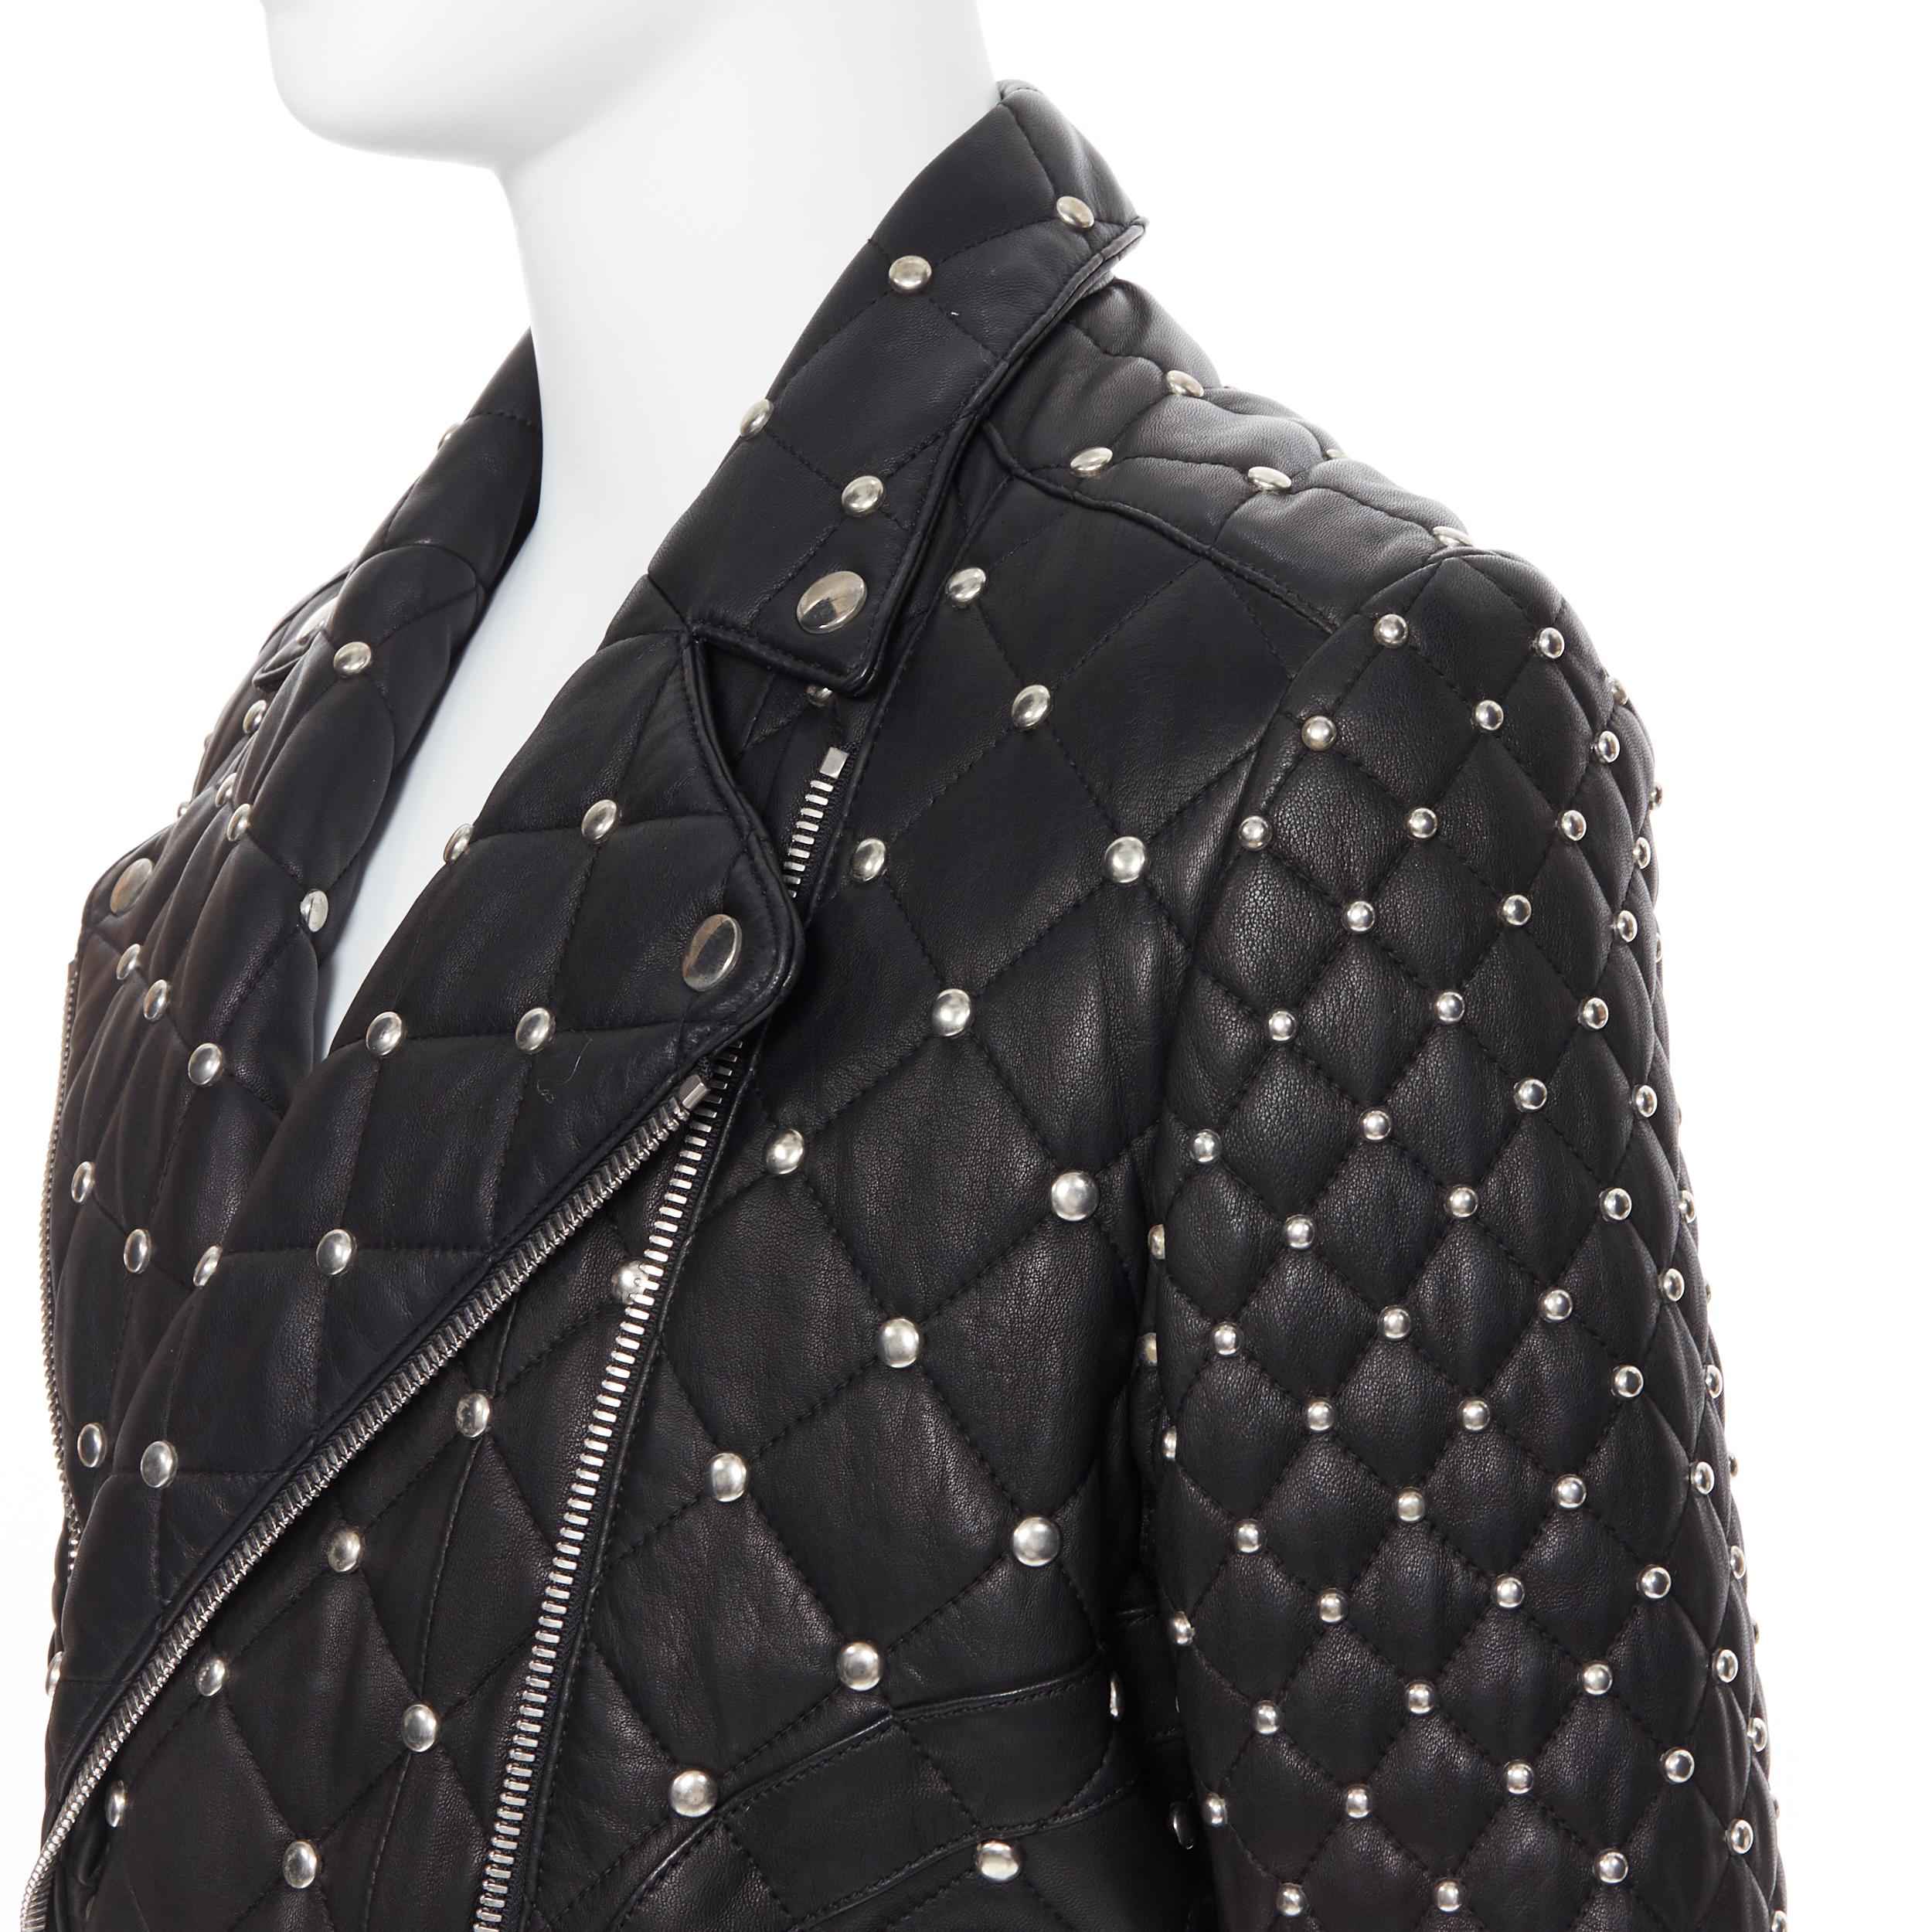 new BALMAIN black lambskin silver studded diamond quilted biker jacket EU48 M
Brand: Balmain
Designer: Olivier Rousteing
Model Name / Style: Leather biker
Material: Leather
Color: Black
Pattern: Solid
Closure: Zip
Extra Detail: BALMAIN style code: